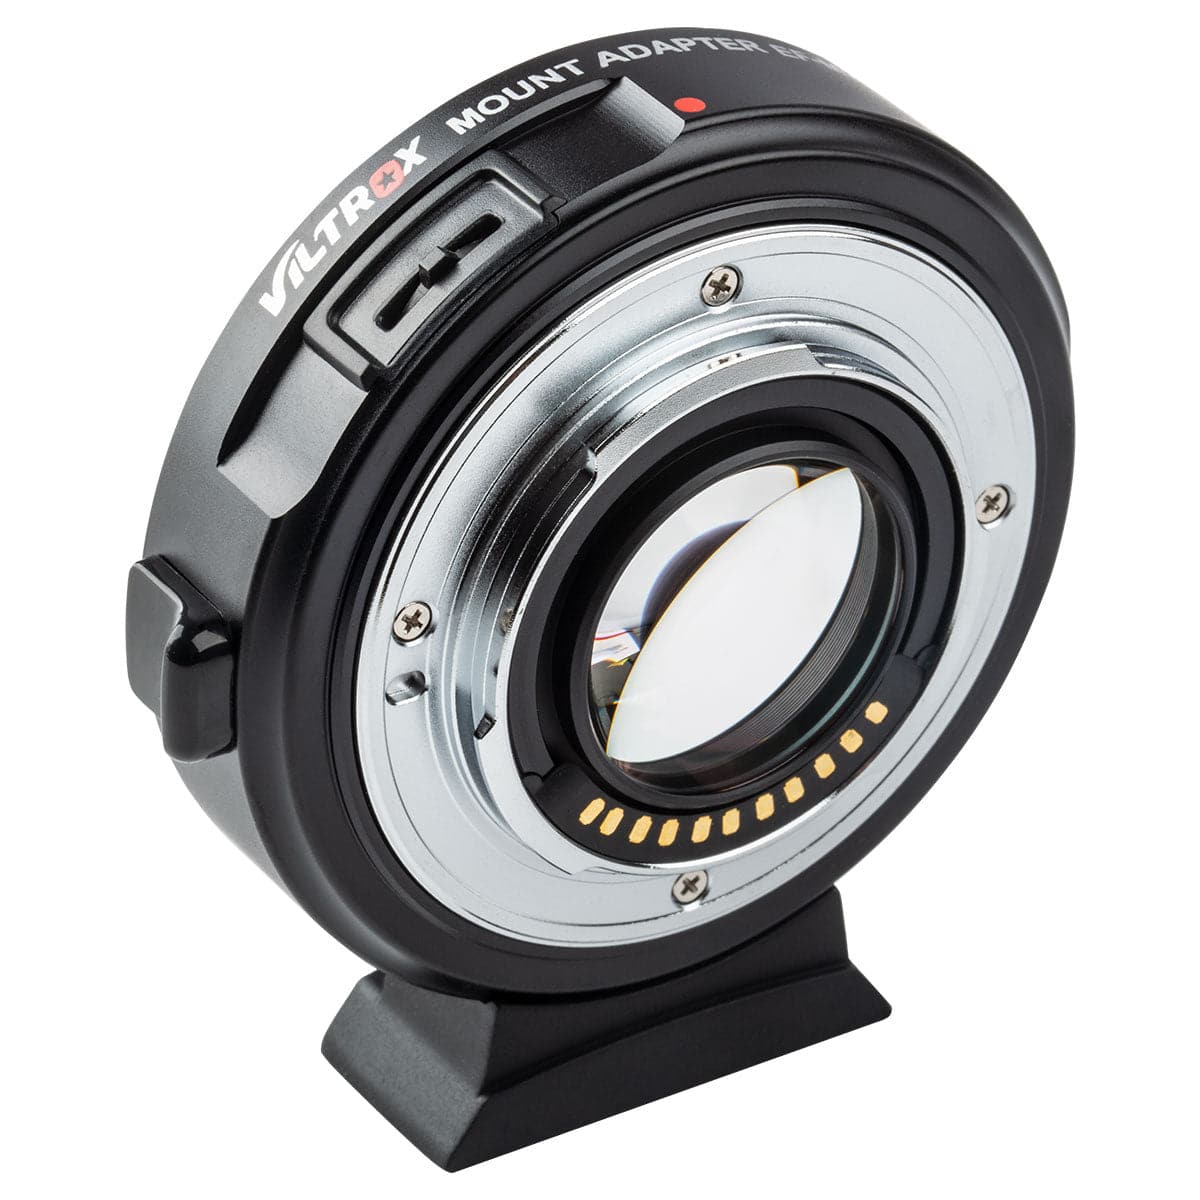 VILTROX EF-M2 II Focal Reducer Speed Booster Adapterfor Canon EF Mount